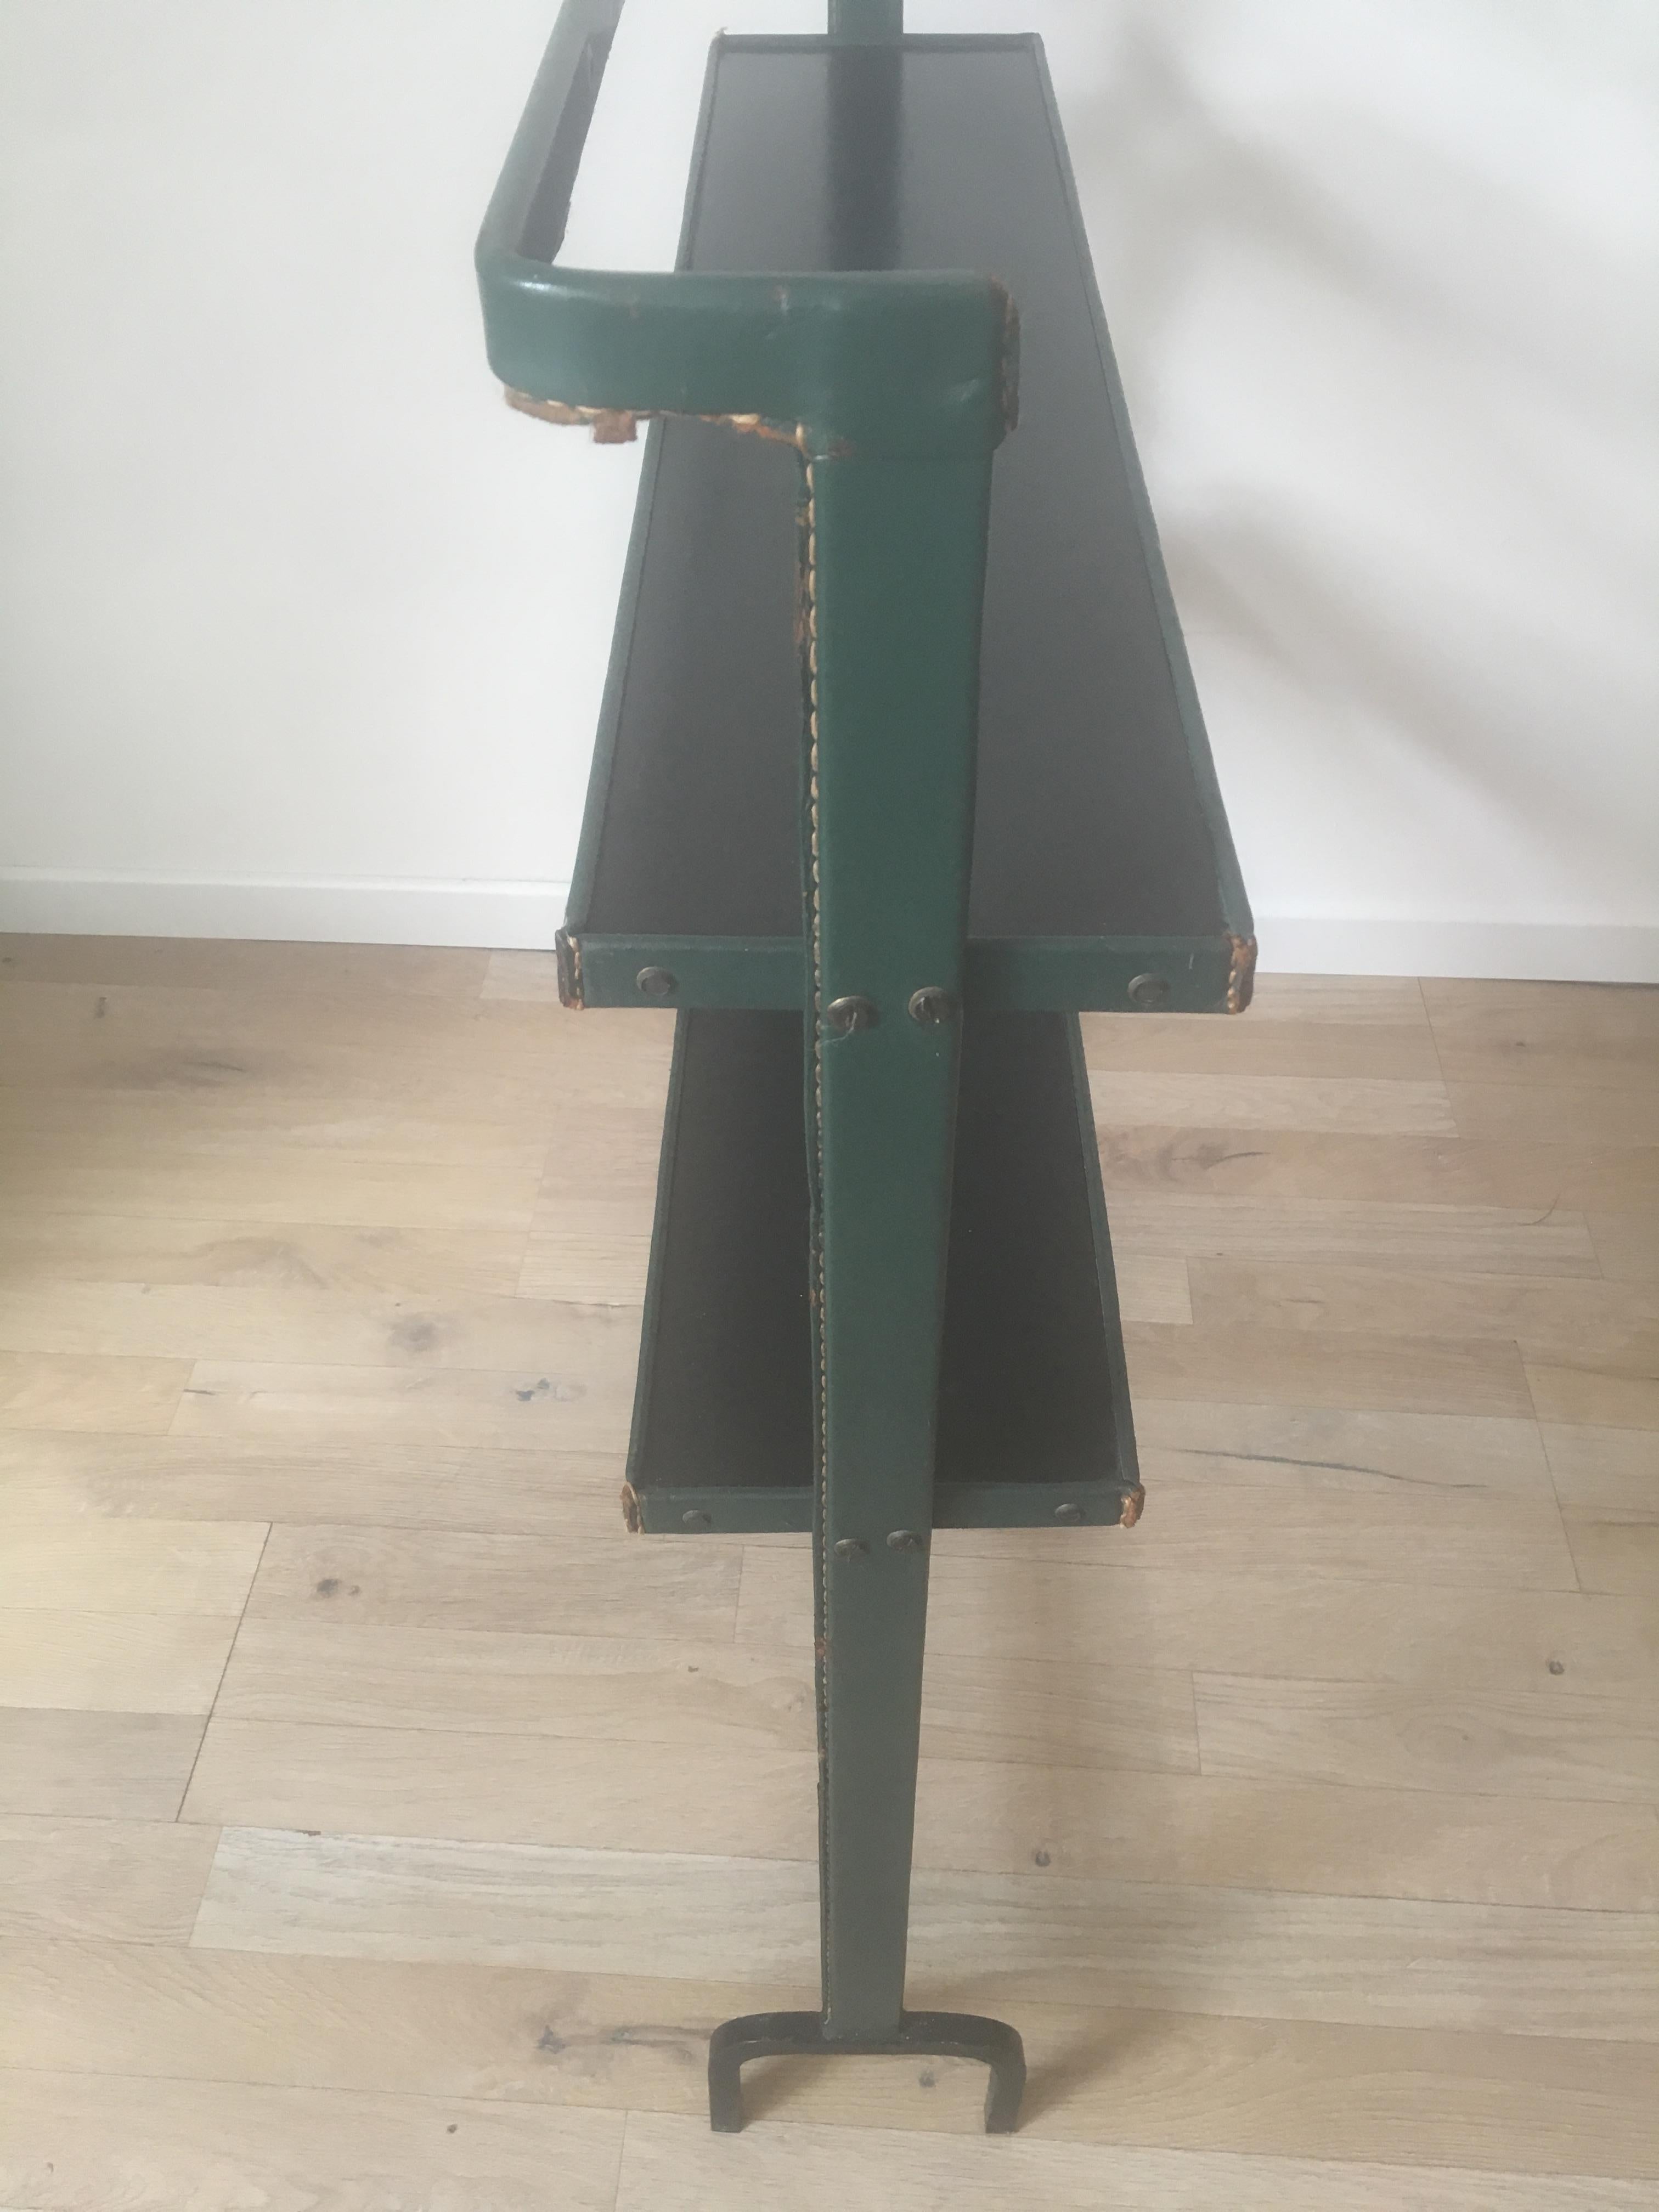 Jacques Adnet Original Green Stitched Leather Bookcase, 2 Shelves, French, 1950s For Sale 4